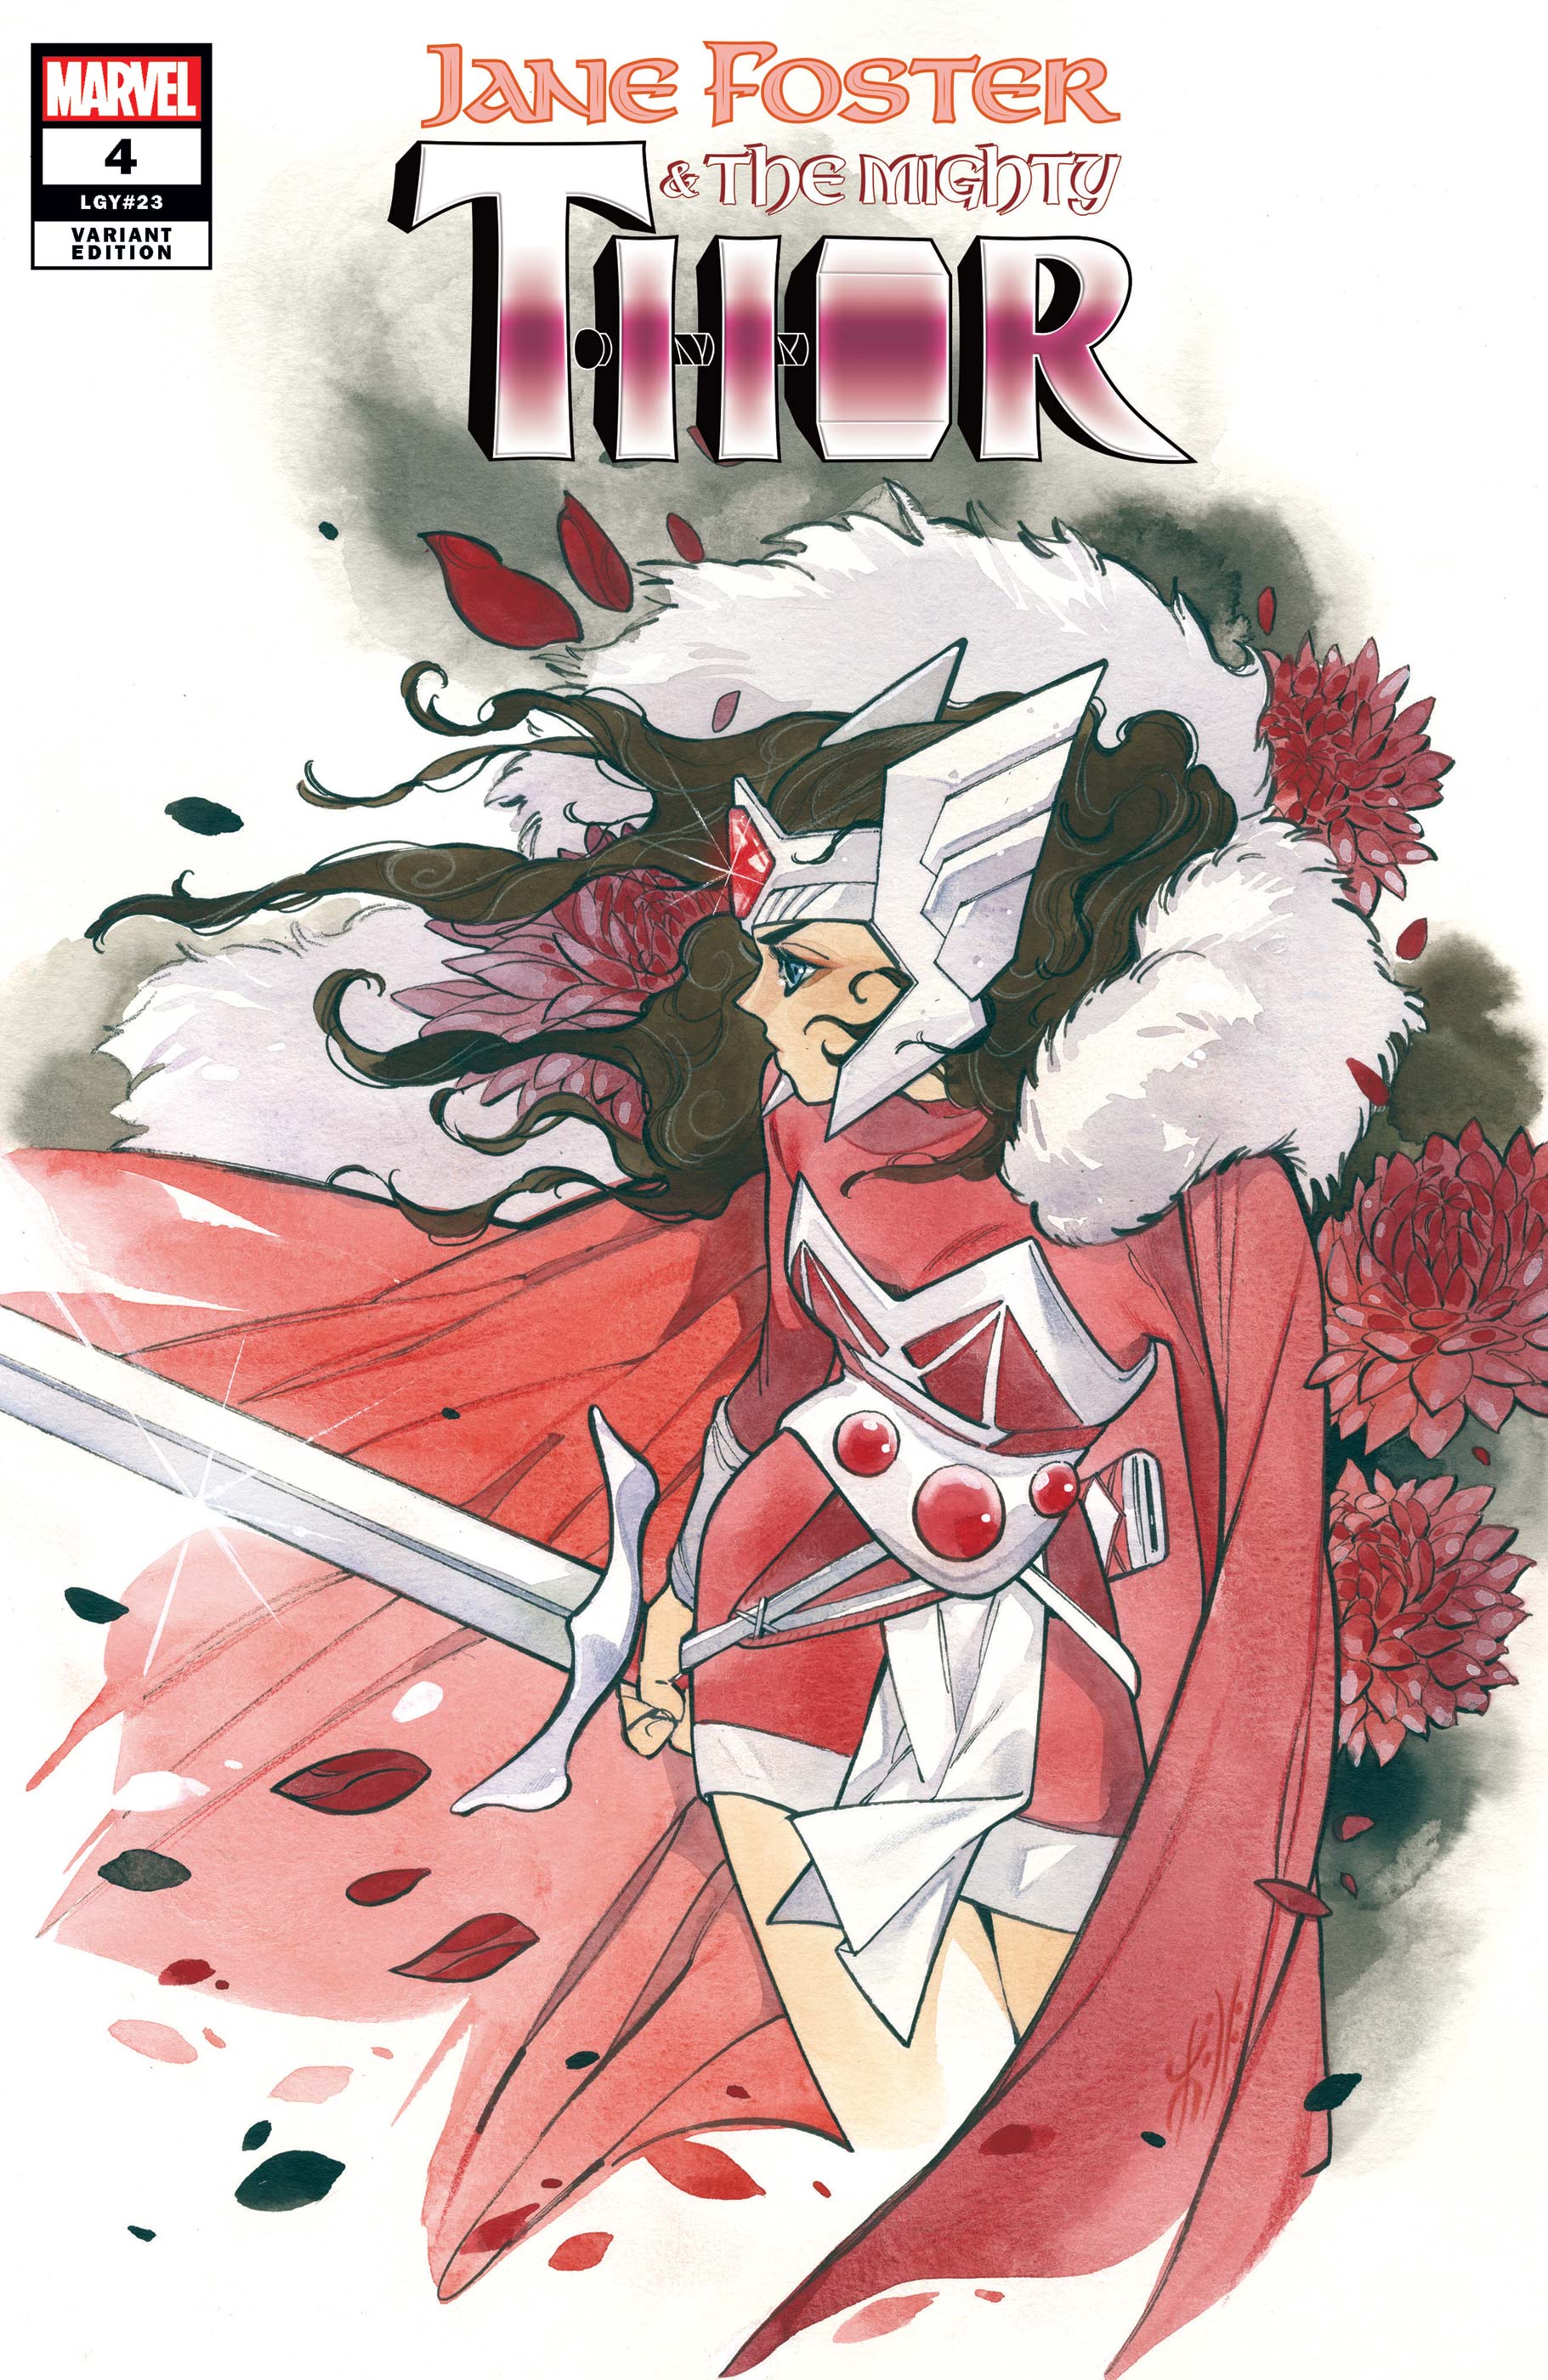 Jane Foster & the Mighty Thor (2022) #4 (Variant)